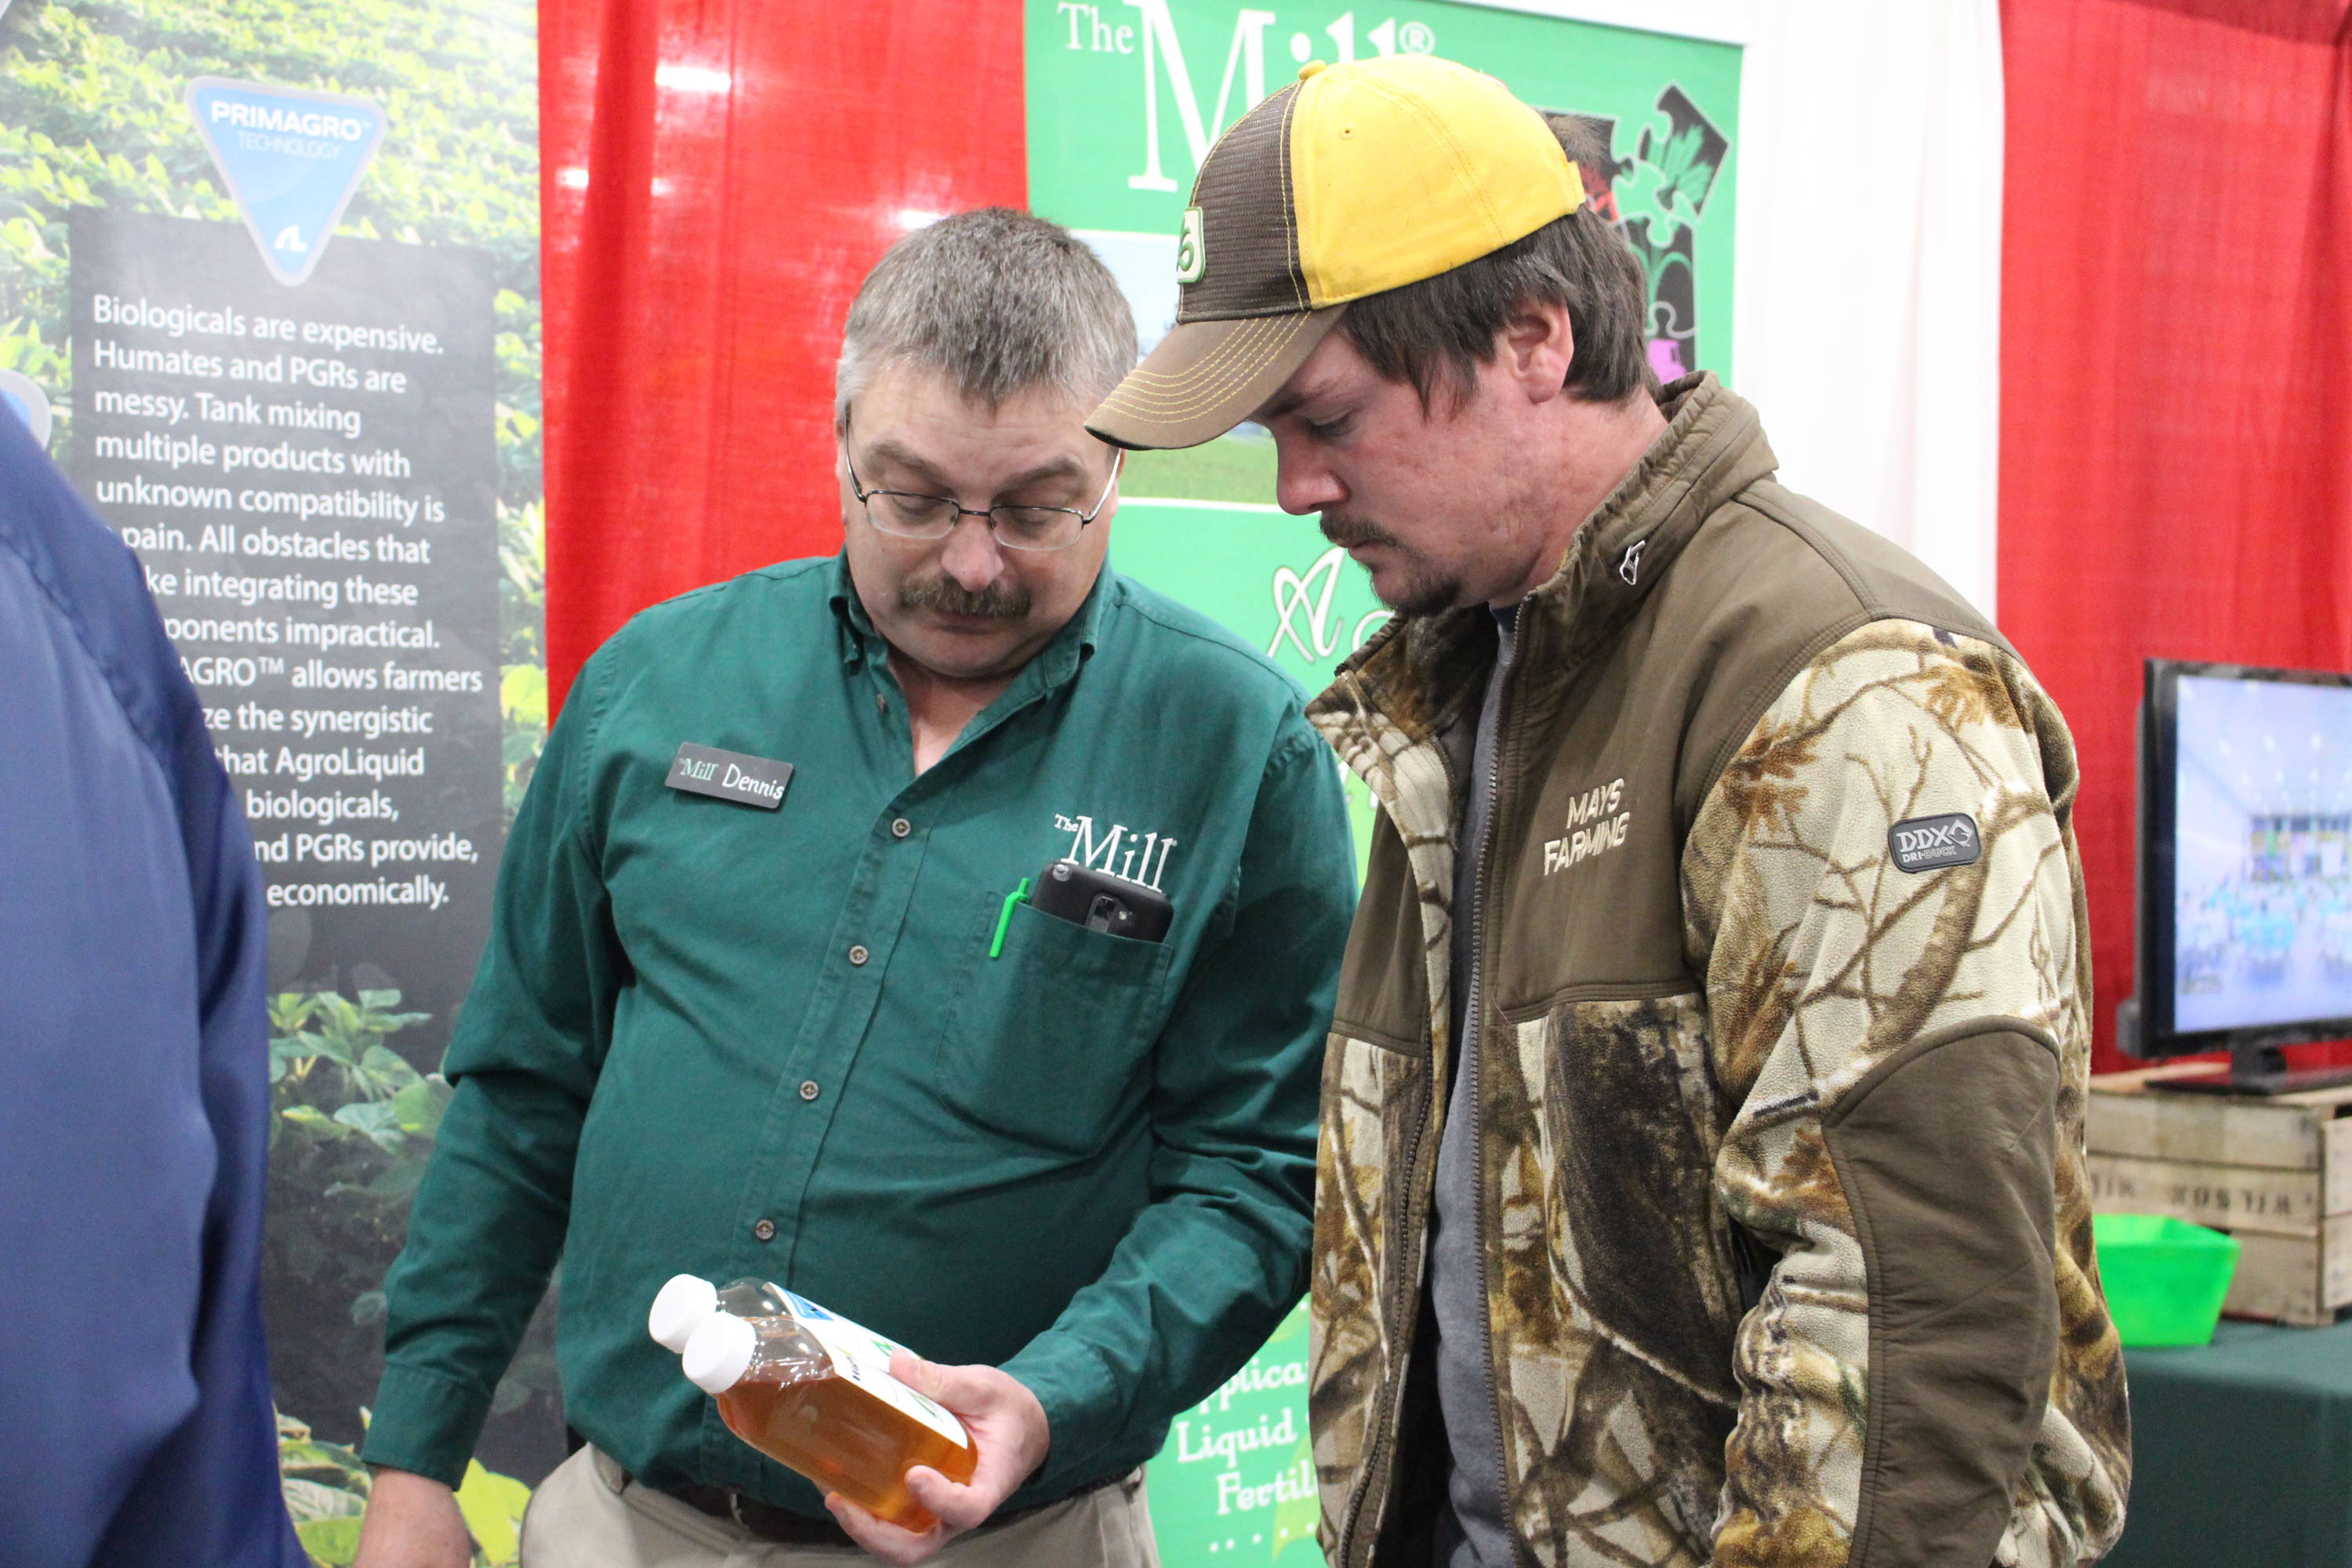 Agronomist and farmer looking at a product.